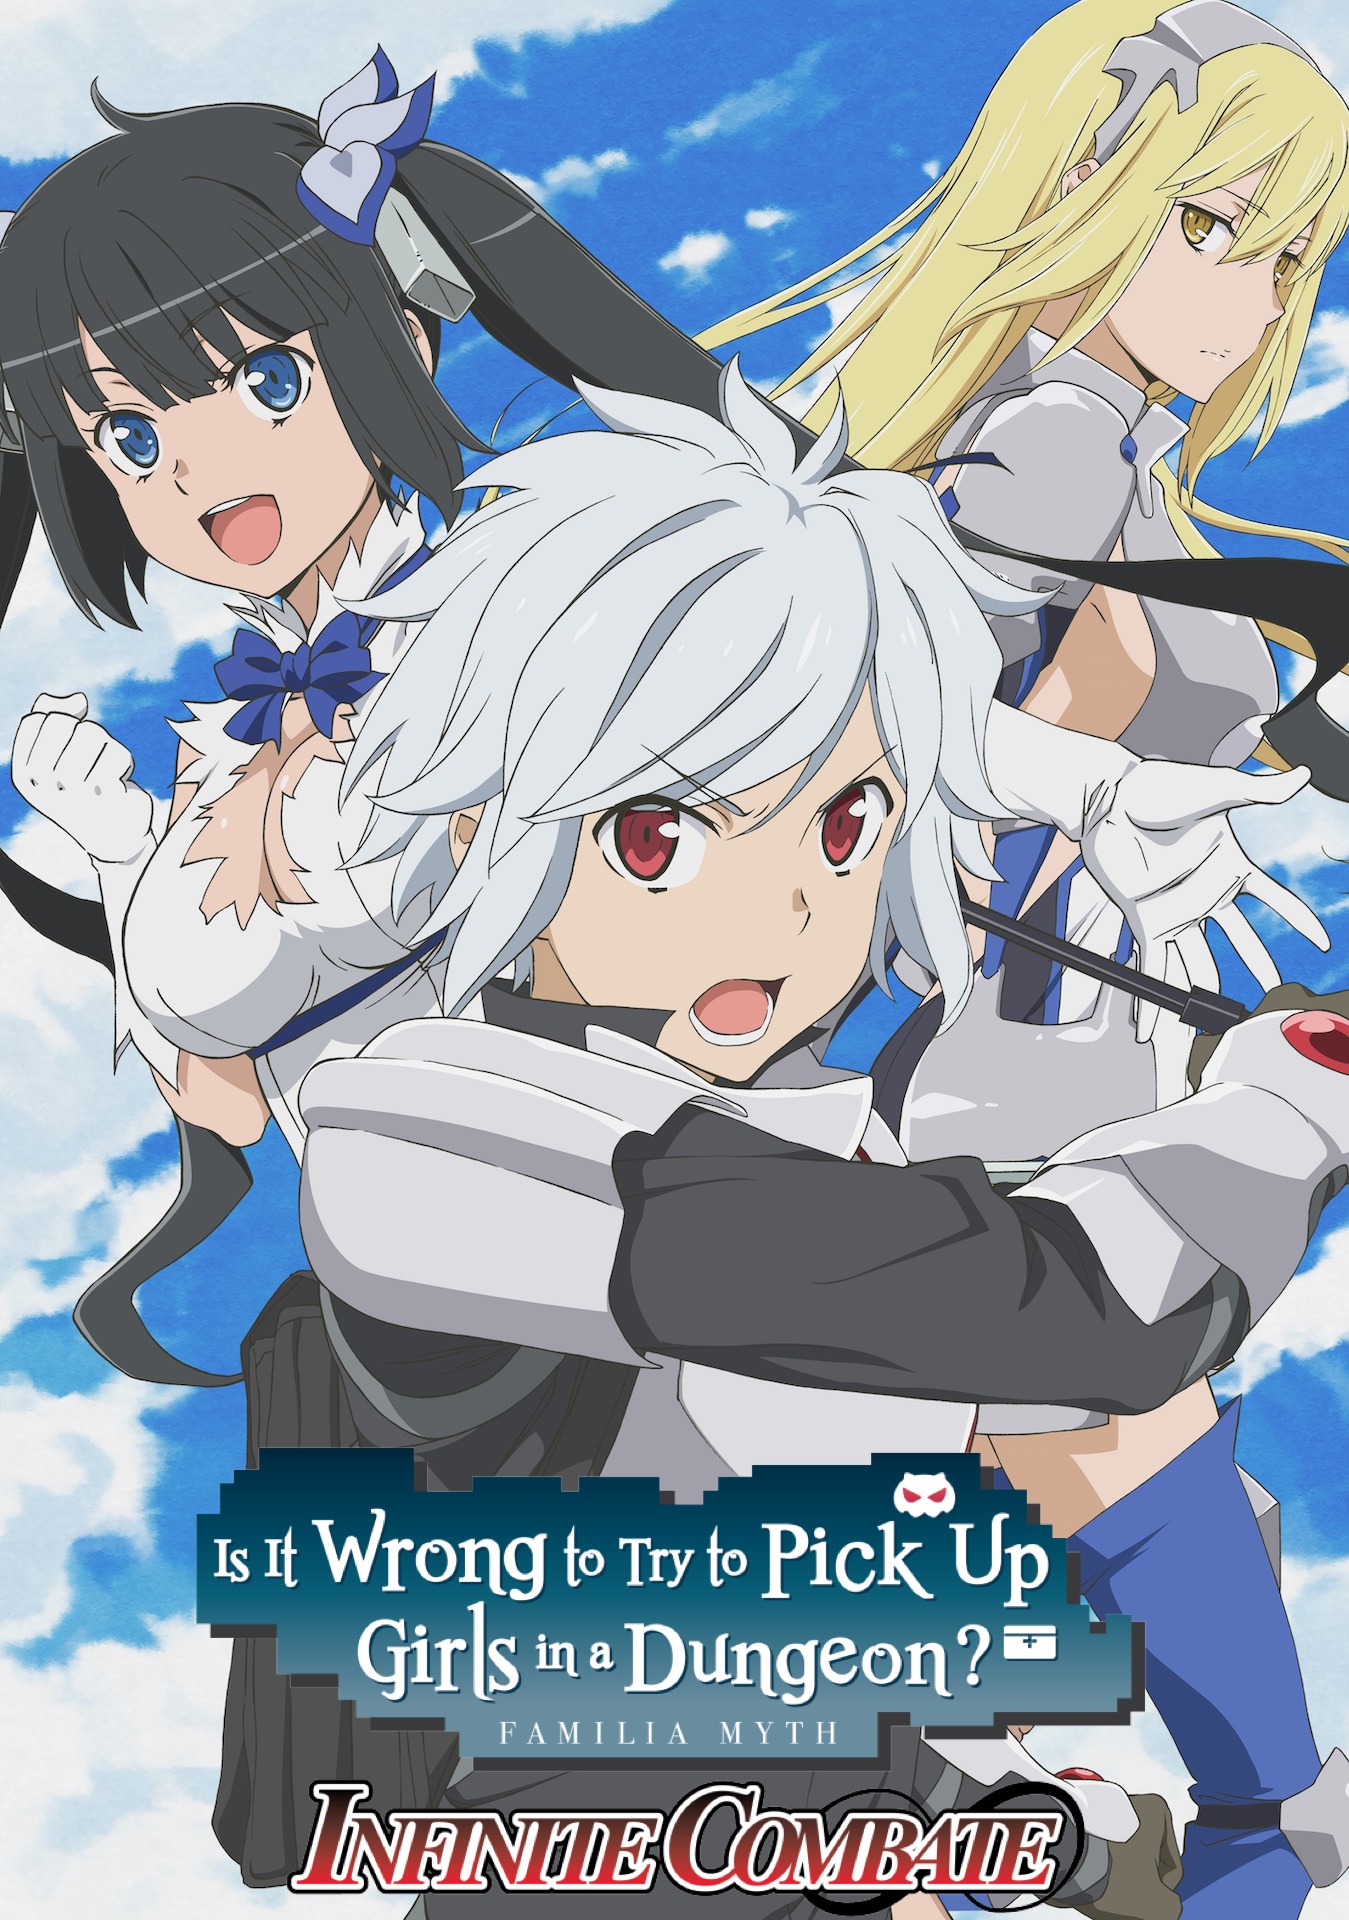 The DanMachi Experience - Everything From the Light Novels, Anime